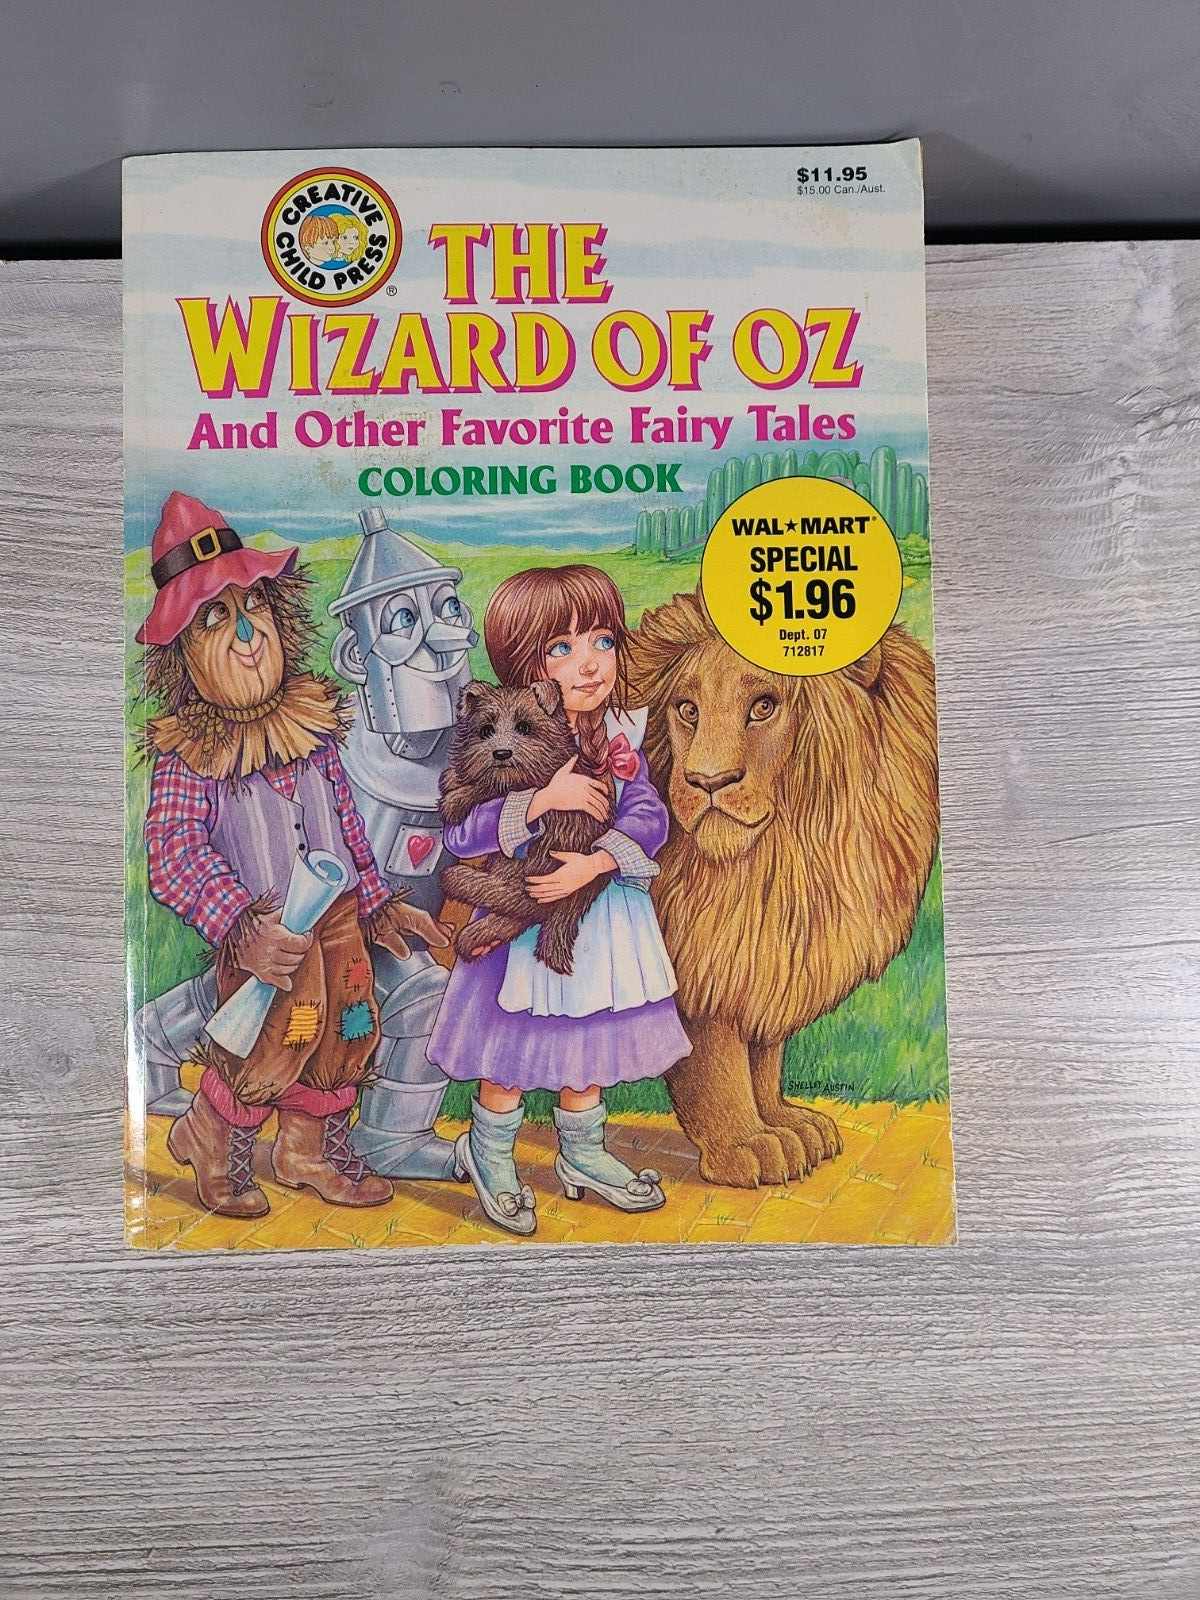 RARE HTF VINTAGE UNUSED ”THE WIZARD OF OZ” COLORING BOOK AND OTHER FAIRY TALES